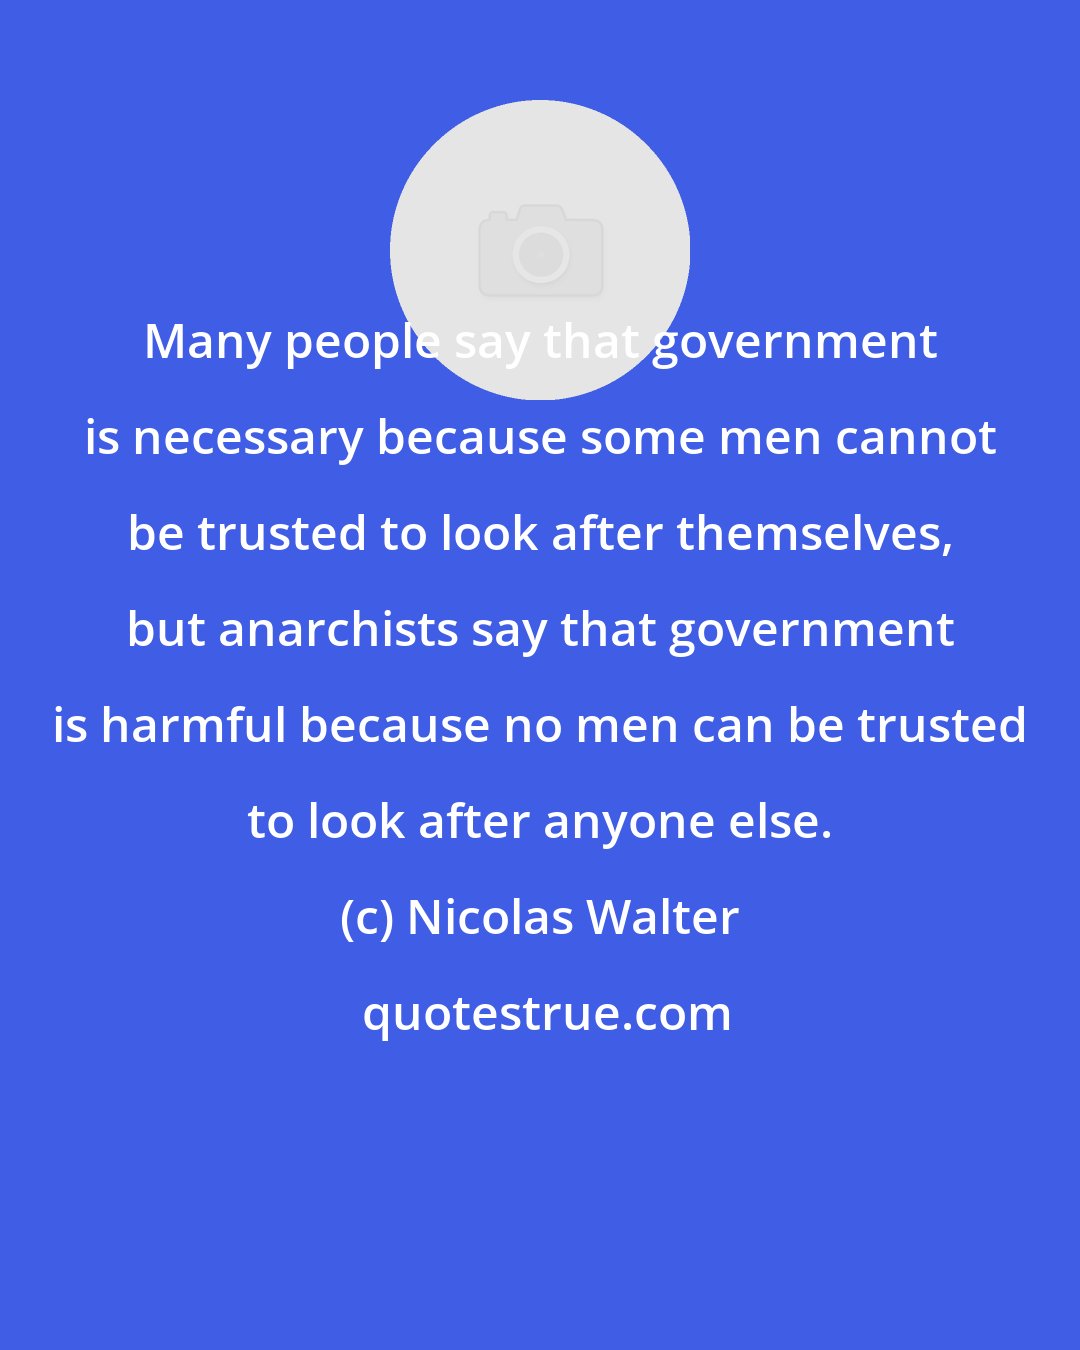 Nicolas Walter: Many people say that government is necessary because some men cannot be trusted to look after themselves, but anarchists say that government is harmful because no men can be trusted to look after anyone else.